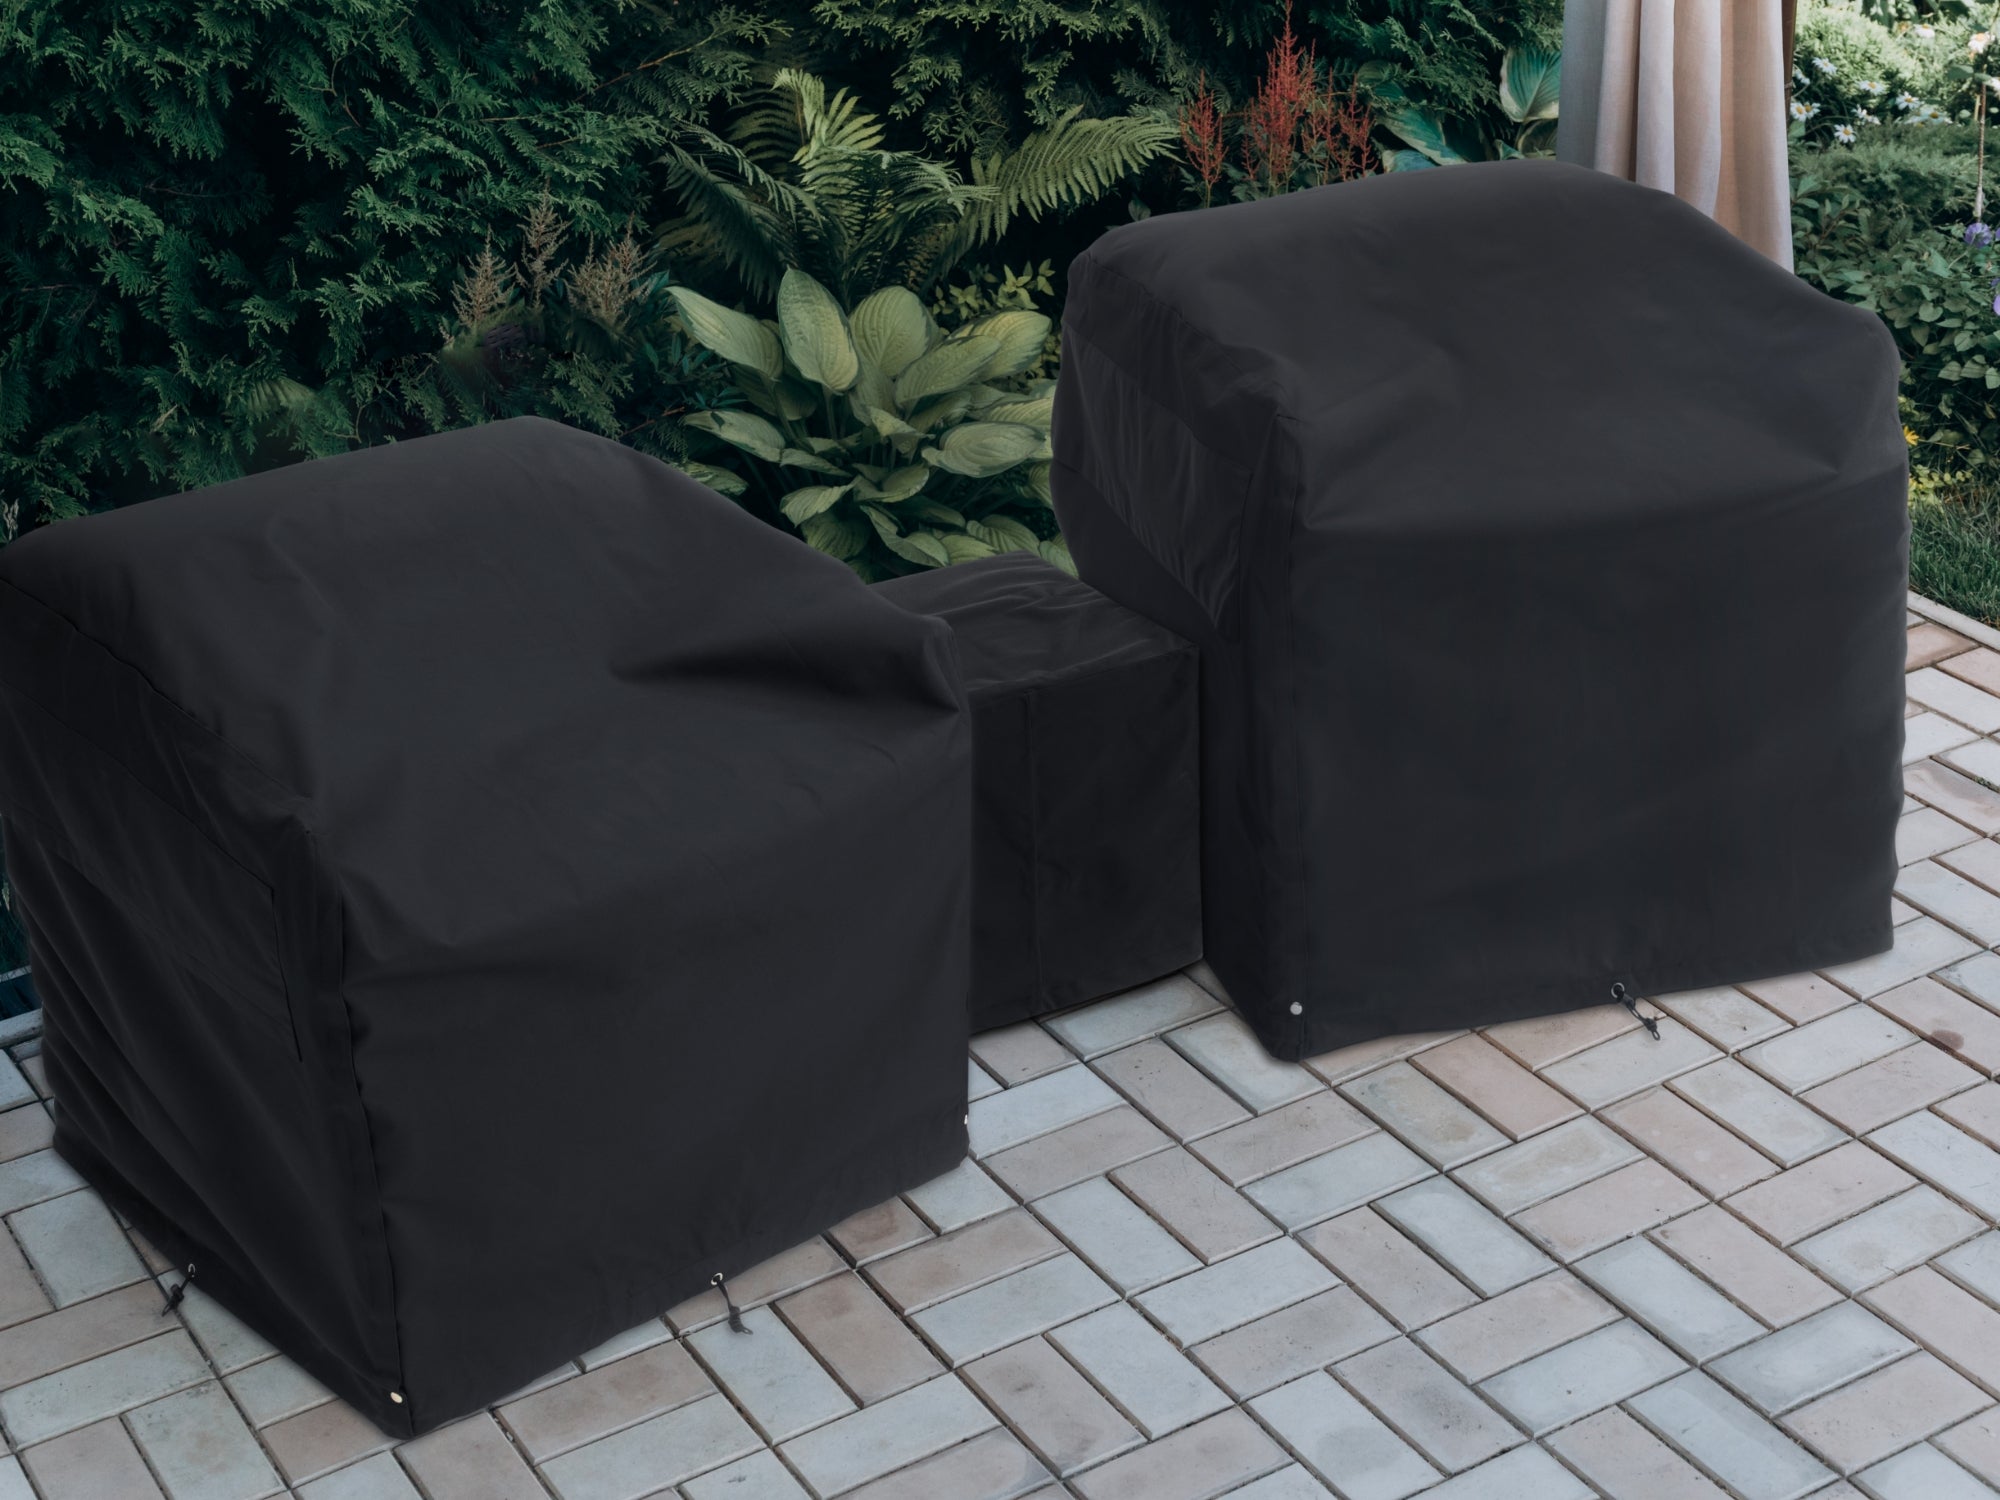 Outdoor Furniture Cover Bundle with 1 & 3 Seater Main Panel, Right/Left Side Panel, Rectangle Umbrella, Square Ottoman/Coffee Table and Side Table Covers